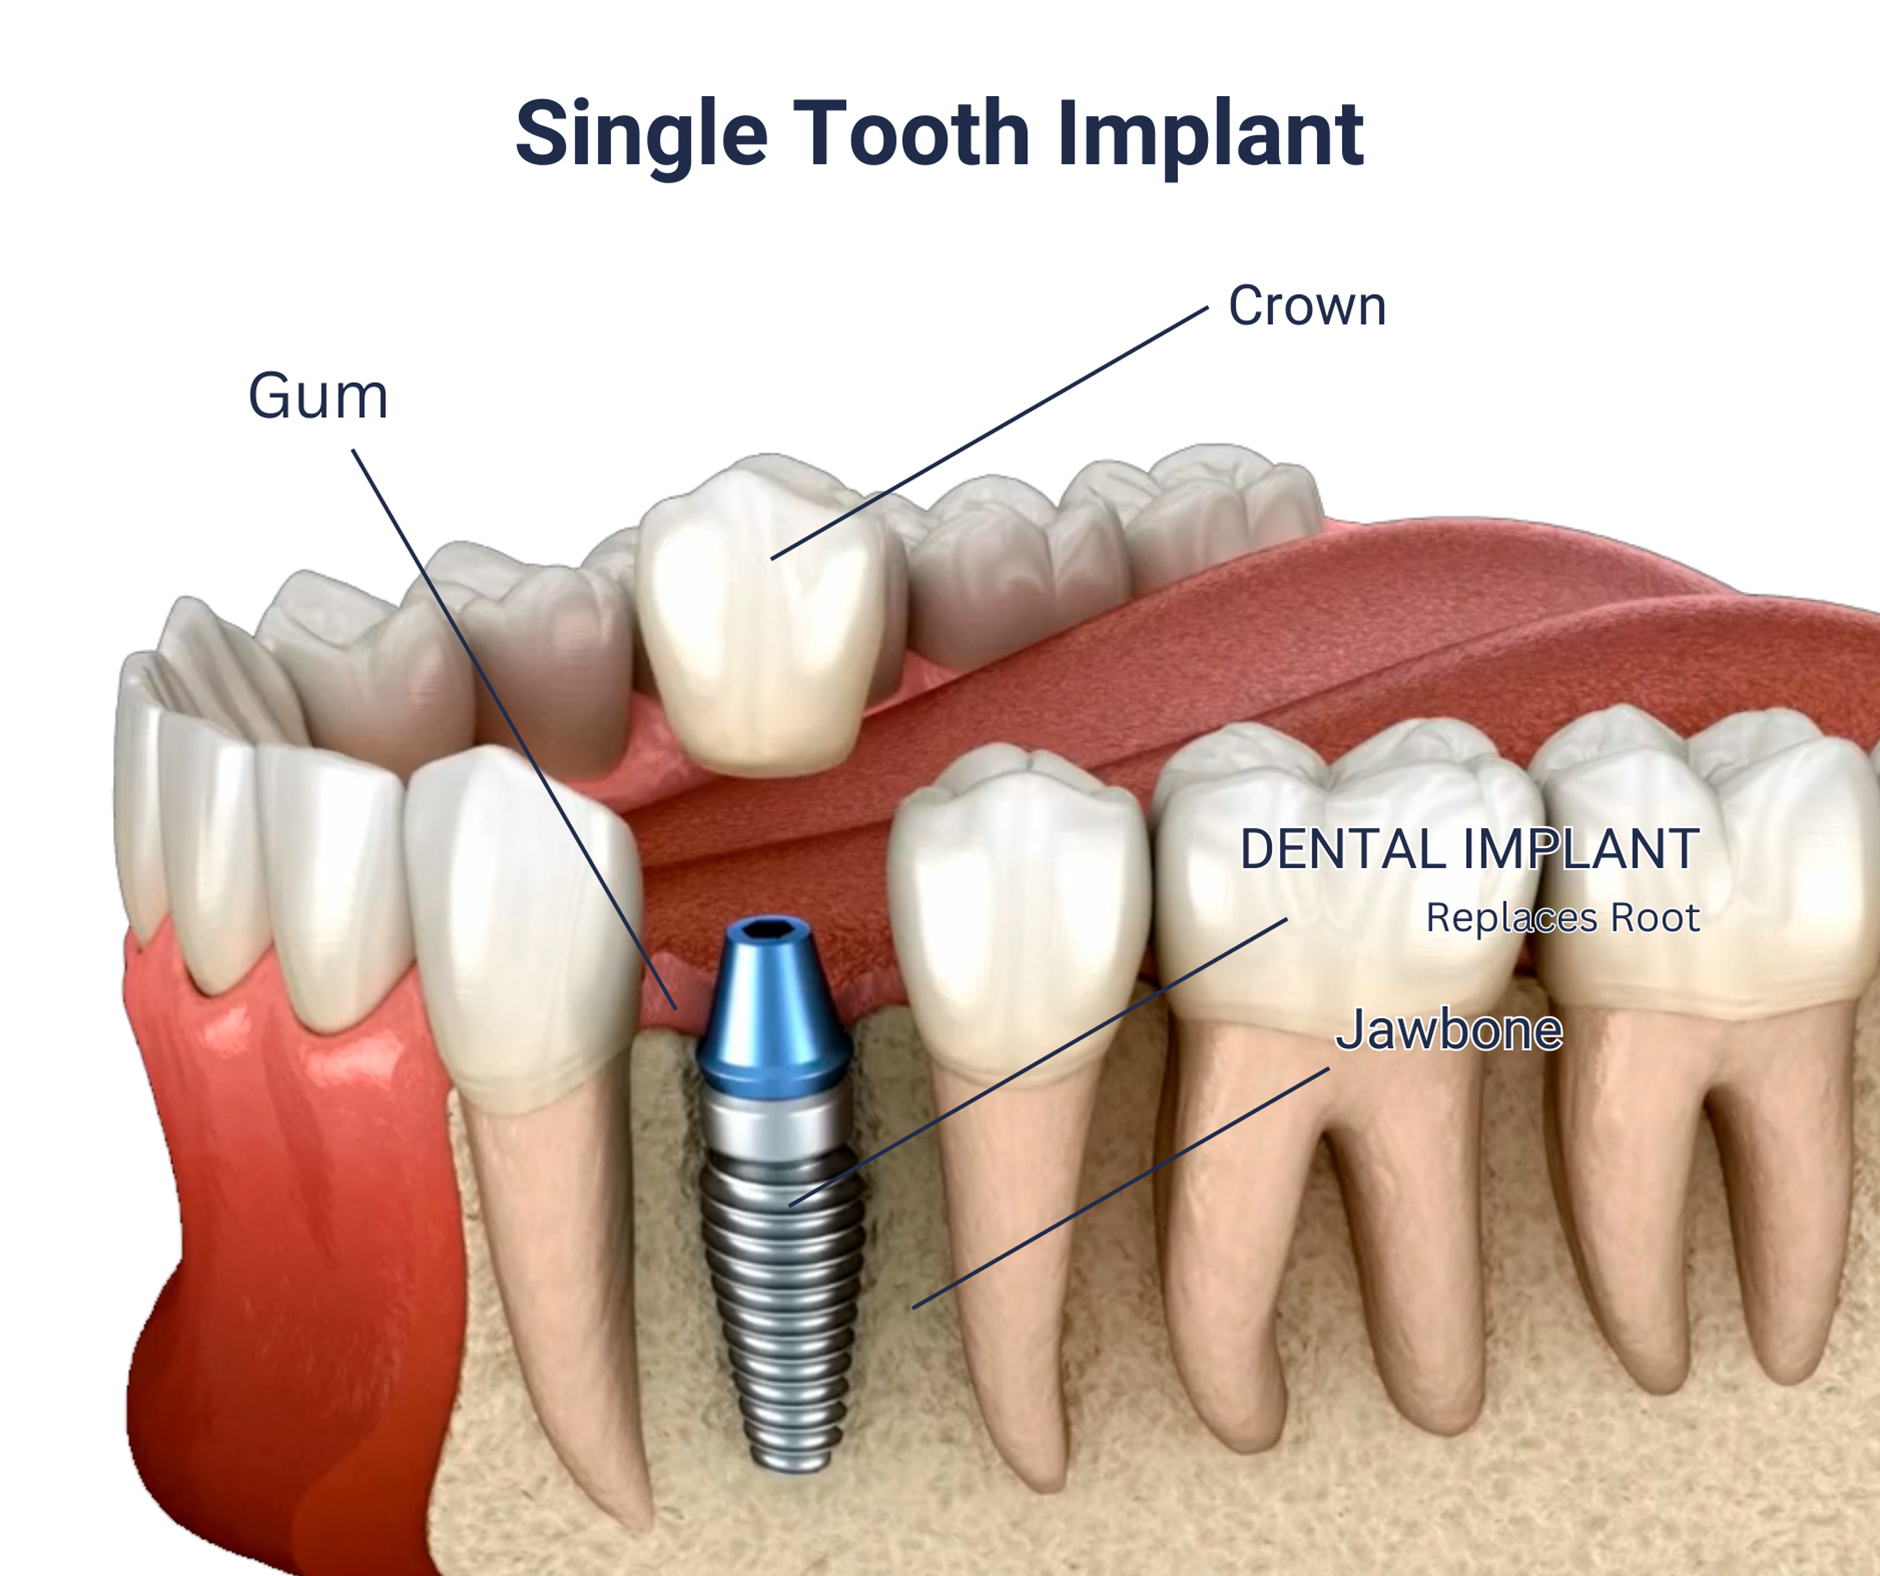 Treatment options for missing single tooth infographics